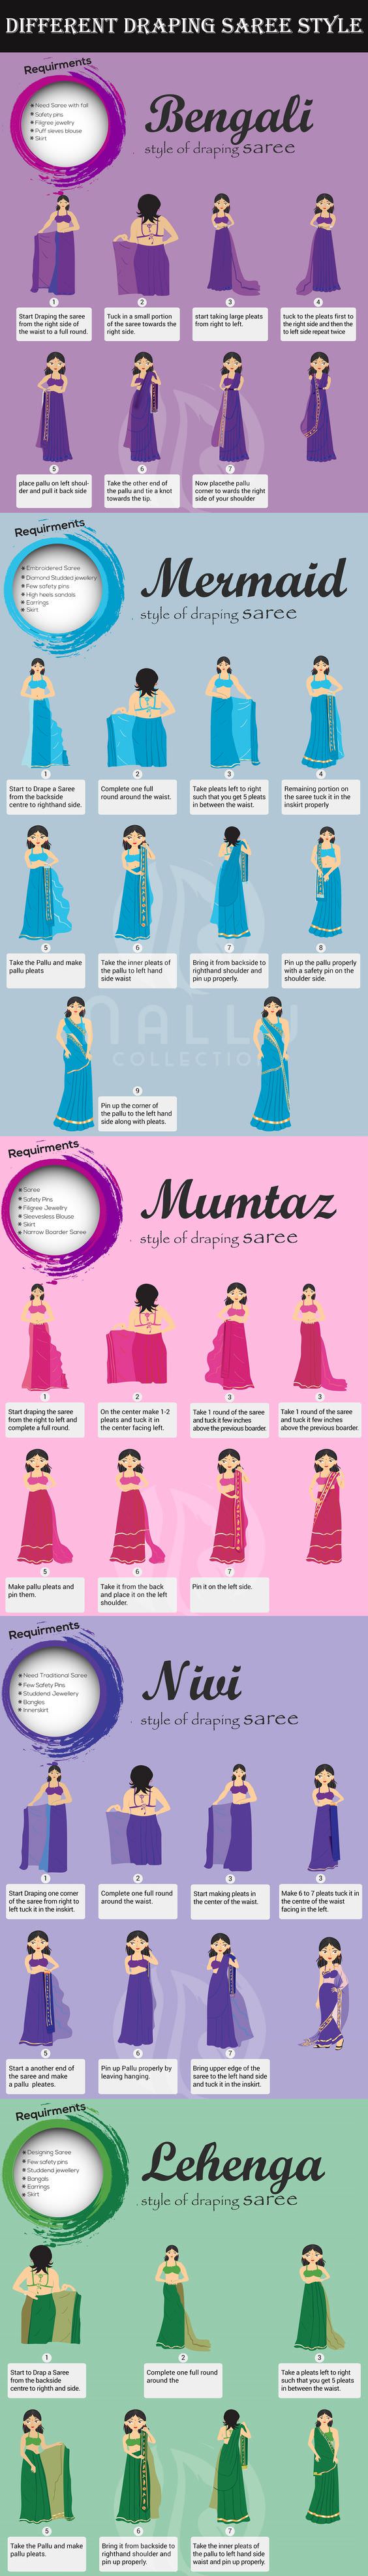 different saree draping styles